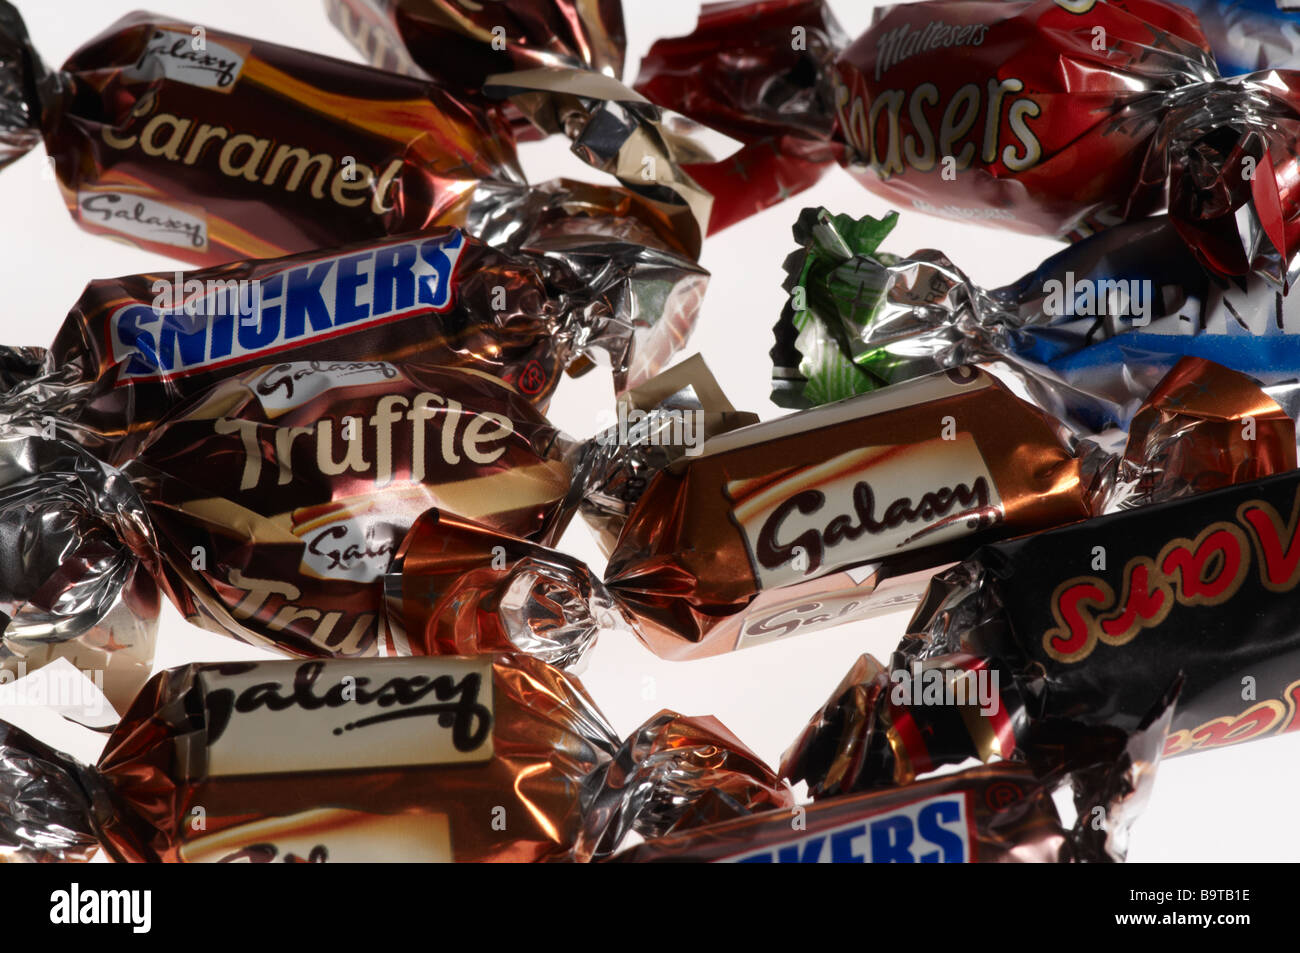 Sweets chocolates mouth size bites Snickers Galaxy Truffle Caramel Mars Stock Photo